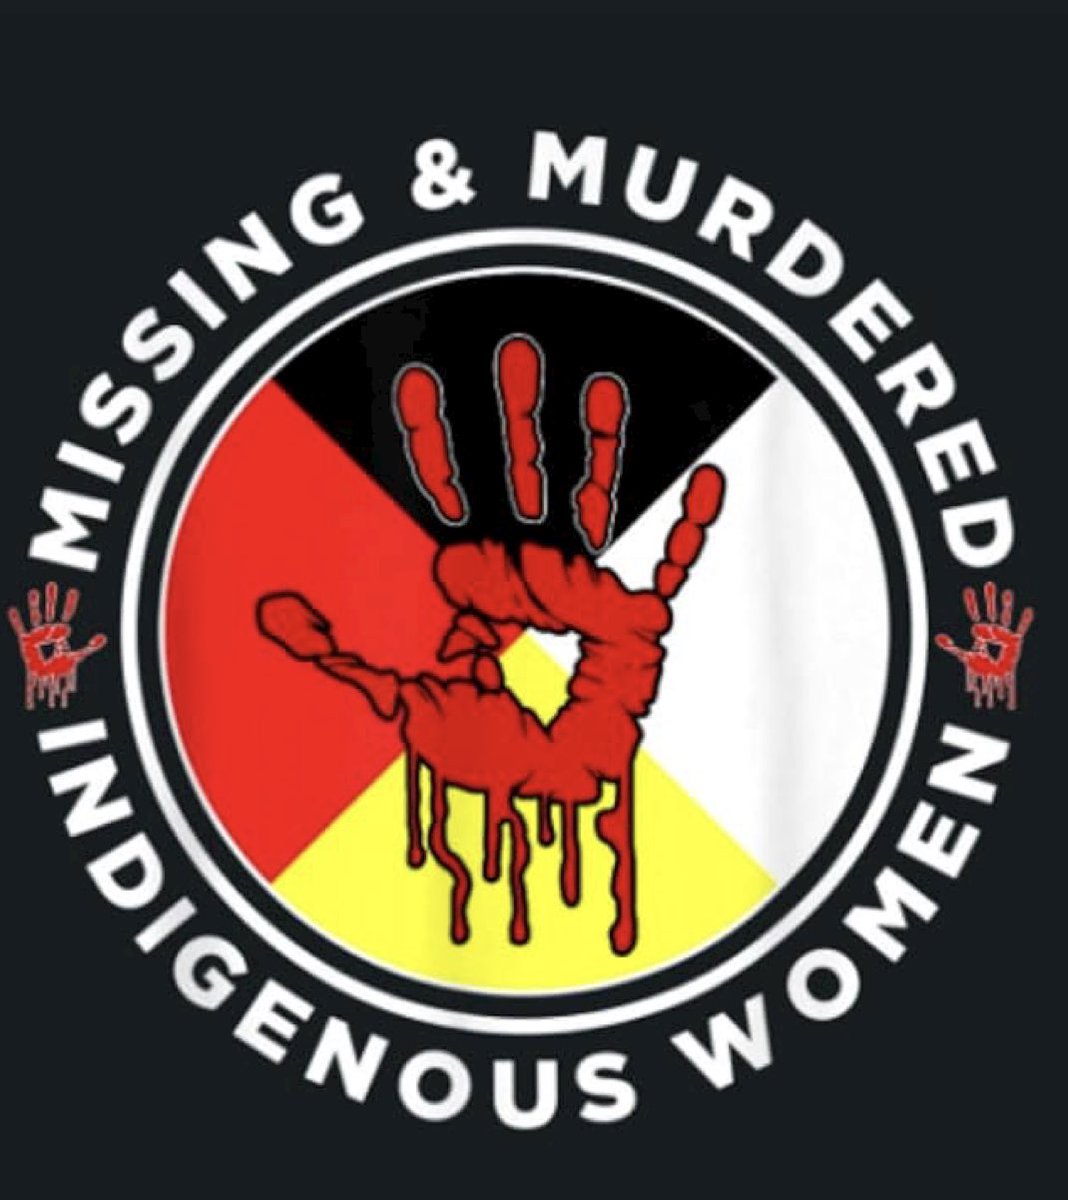 #NoMoreStolenSisters #MMIW #MMIWG2S 

This is something I wish everyone would take seriously.  Why are these women disproportionately missing and nothing is ever done about it? It’s not taken seriously and I believe an investigation would expose very sinister results